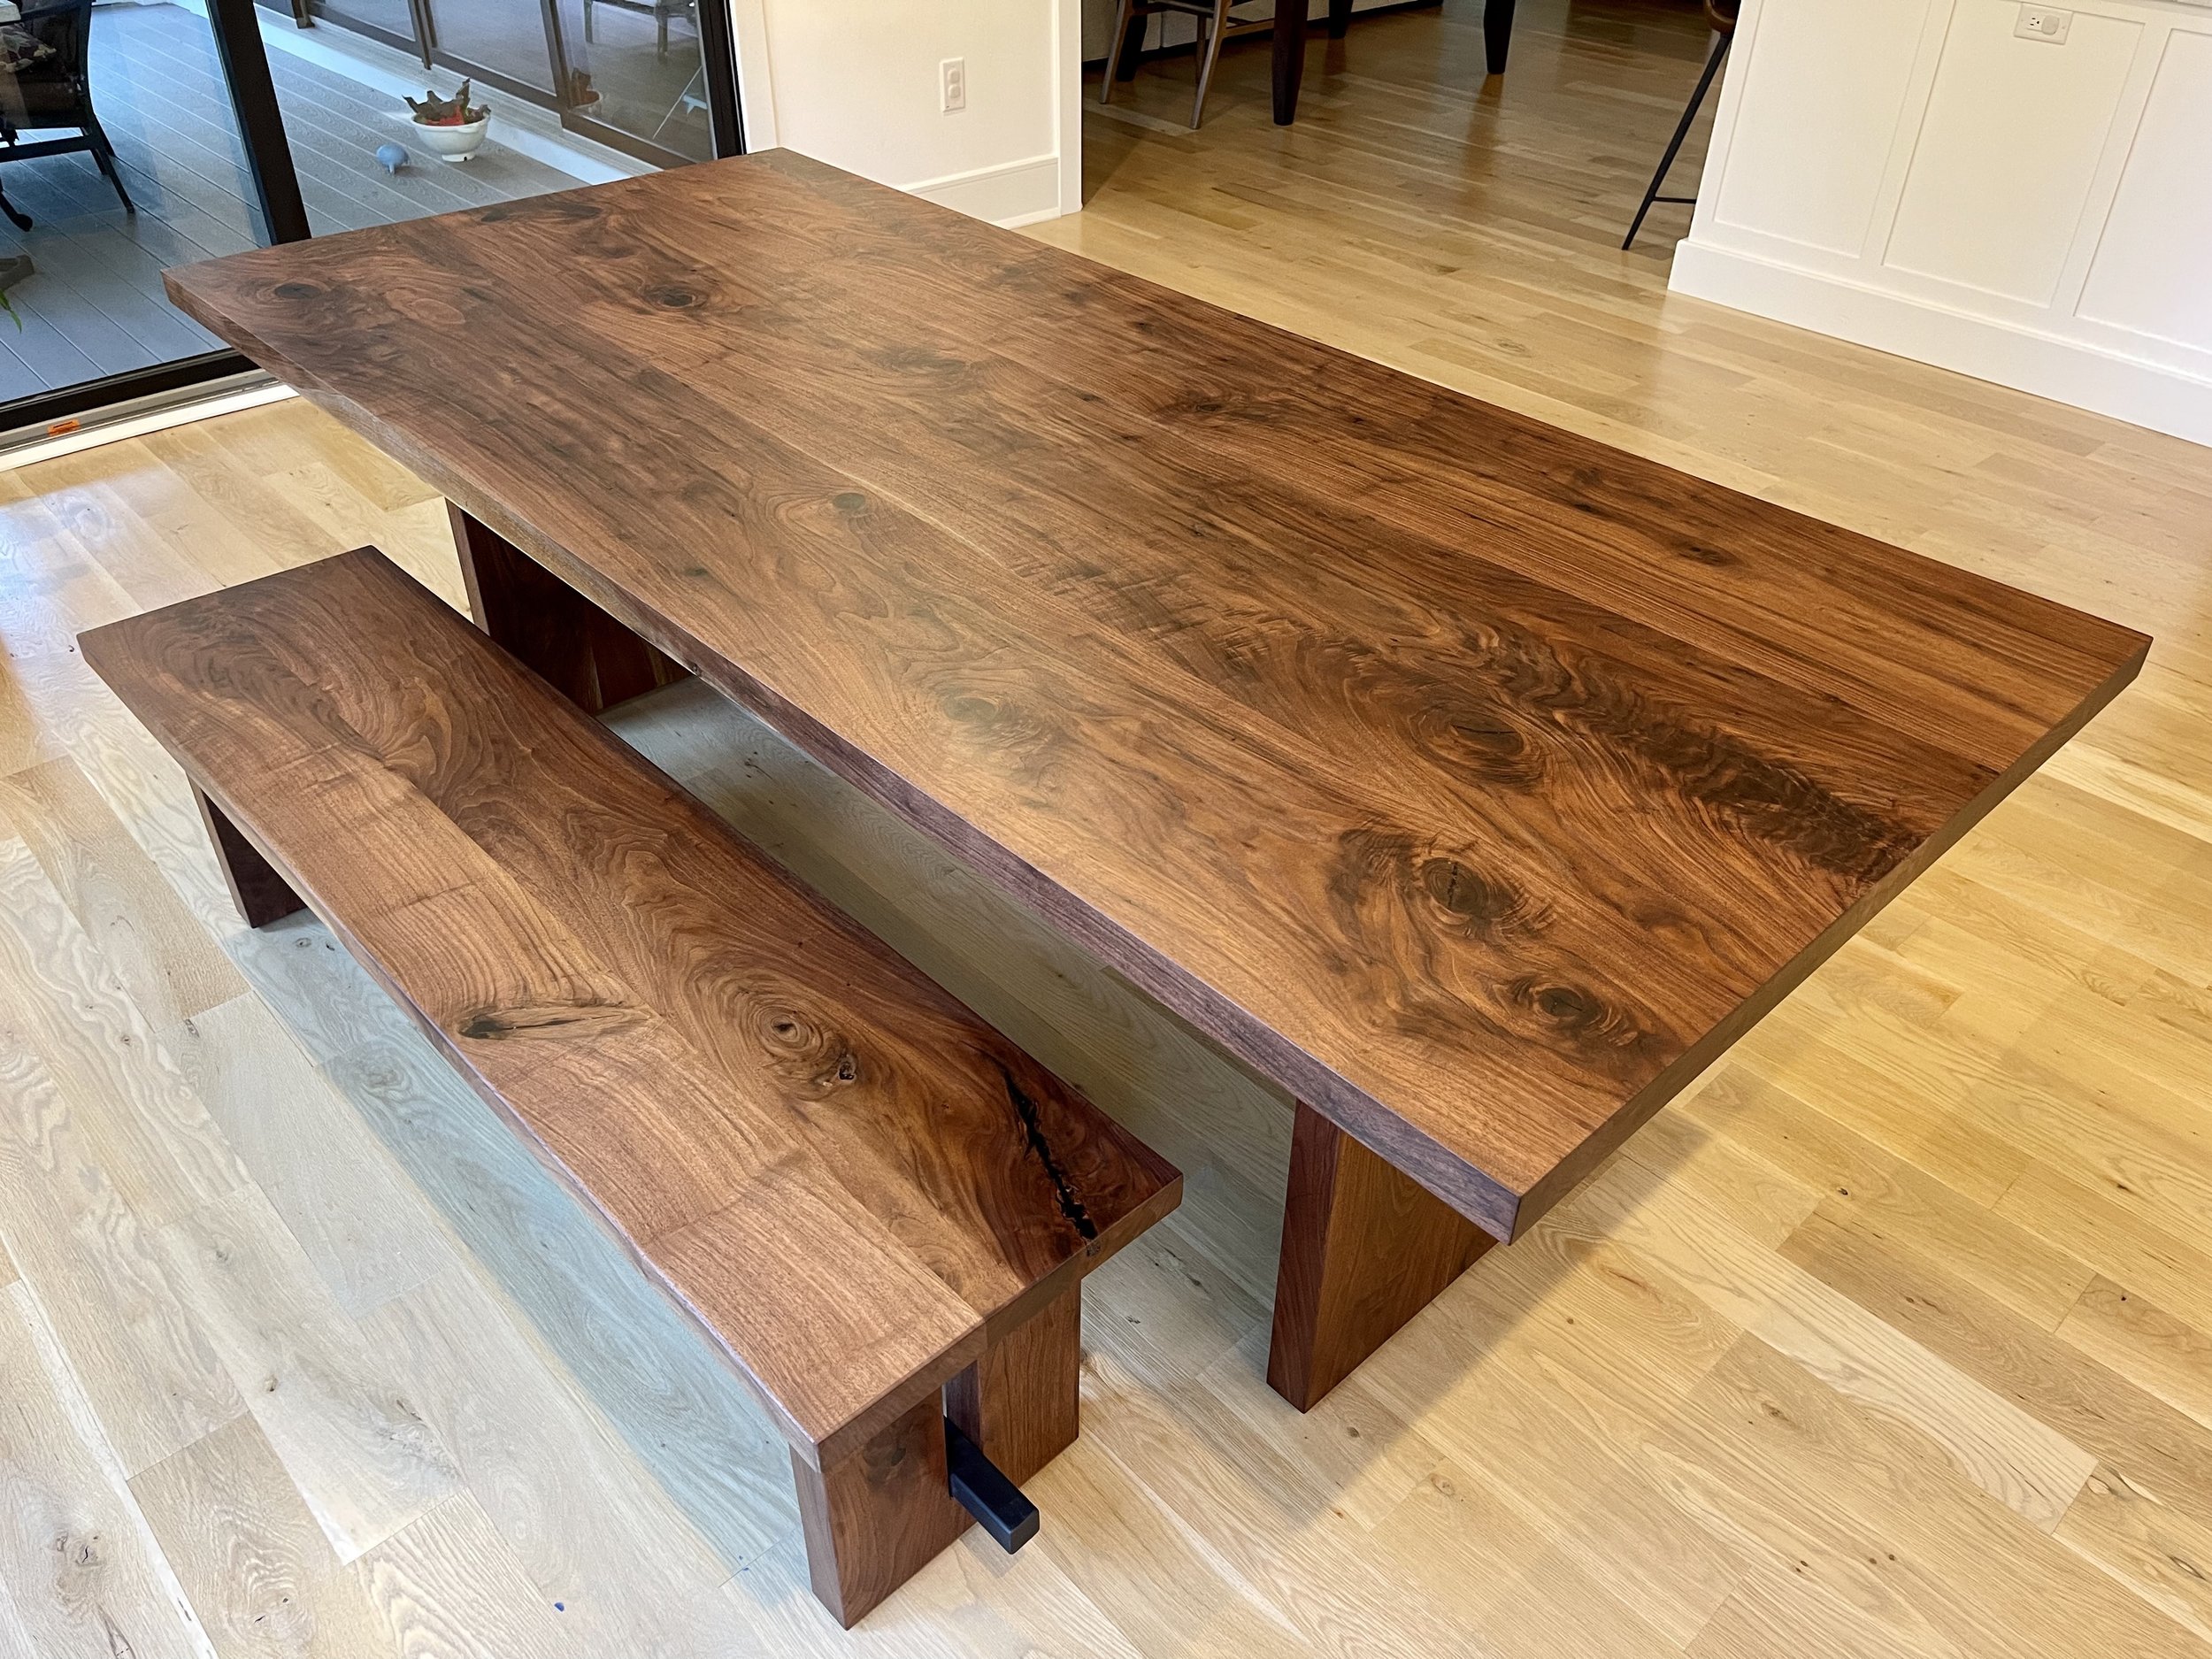 Planked Walnut Dining Table and Bench